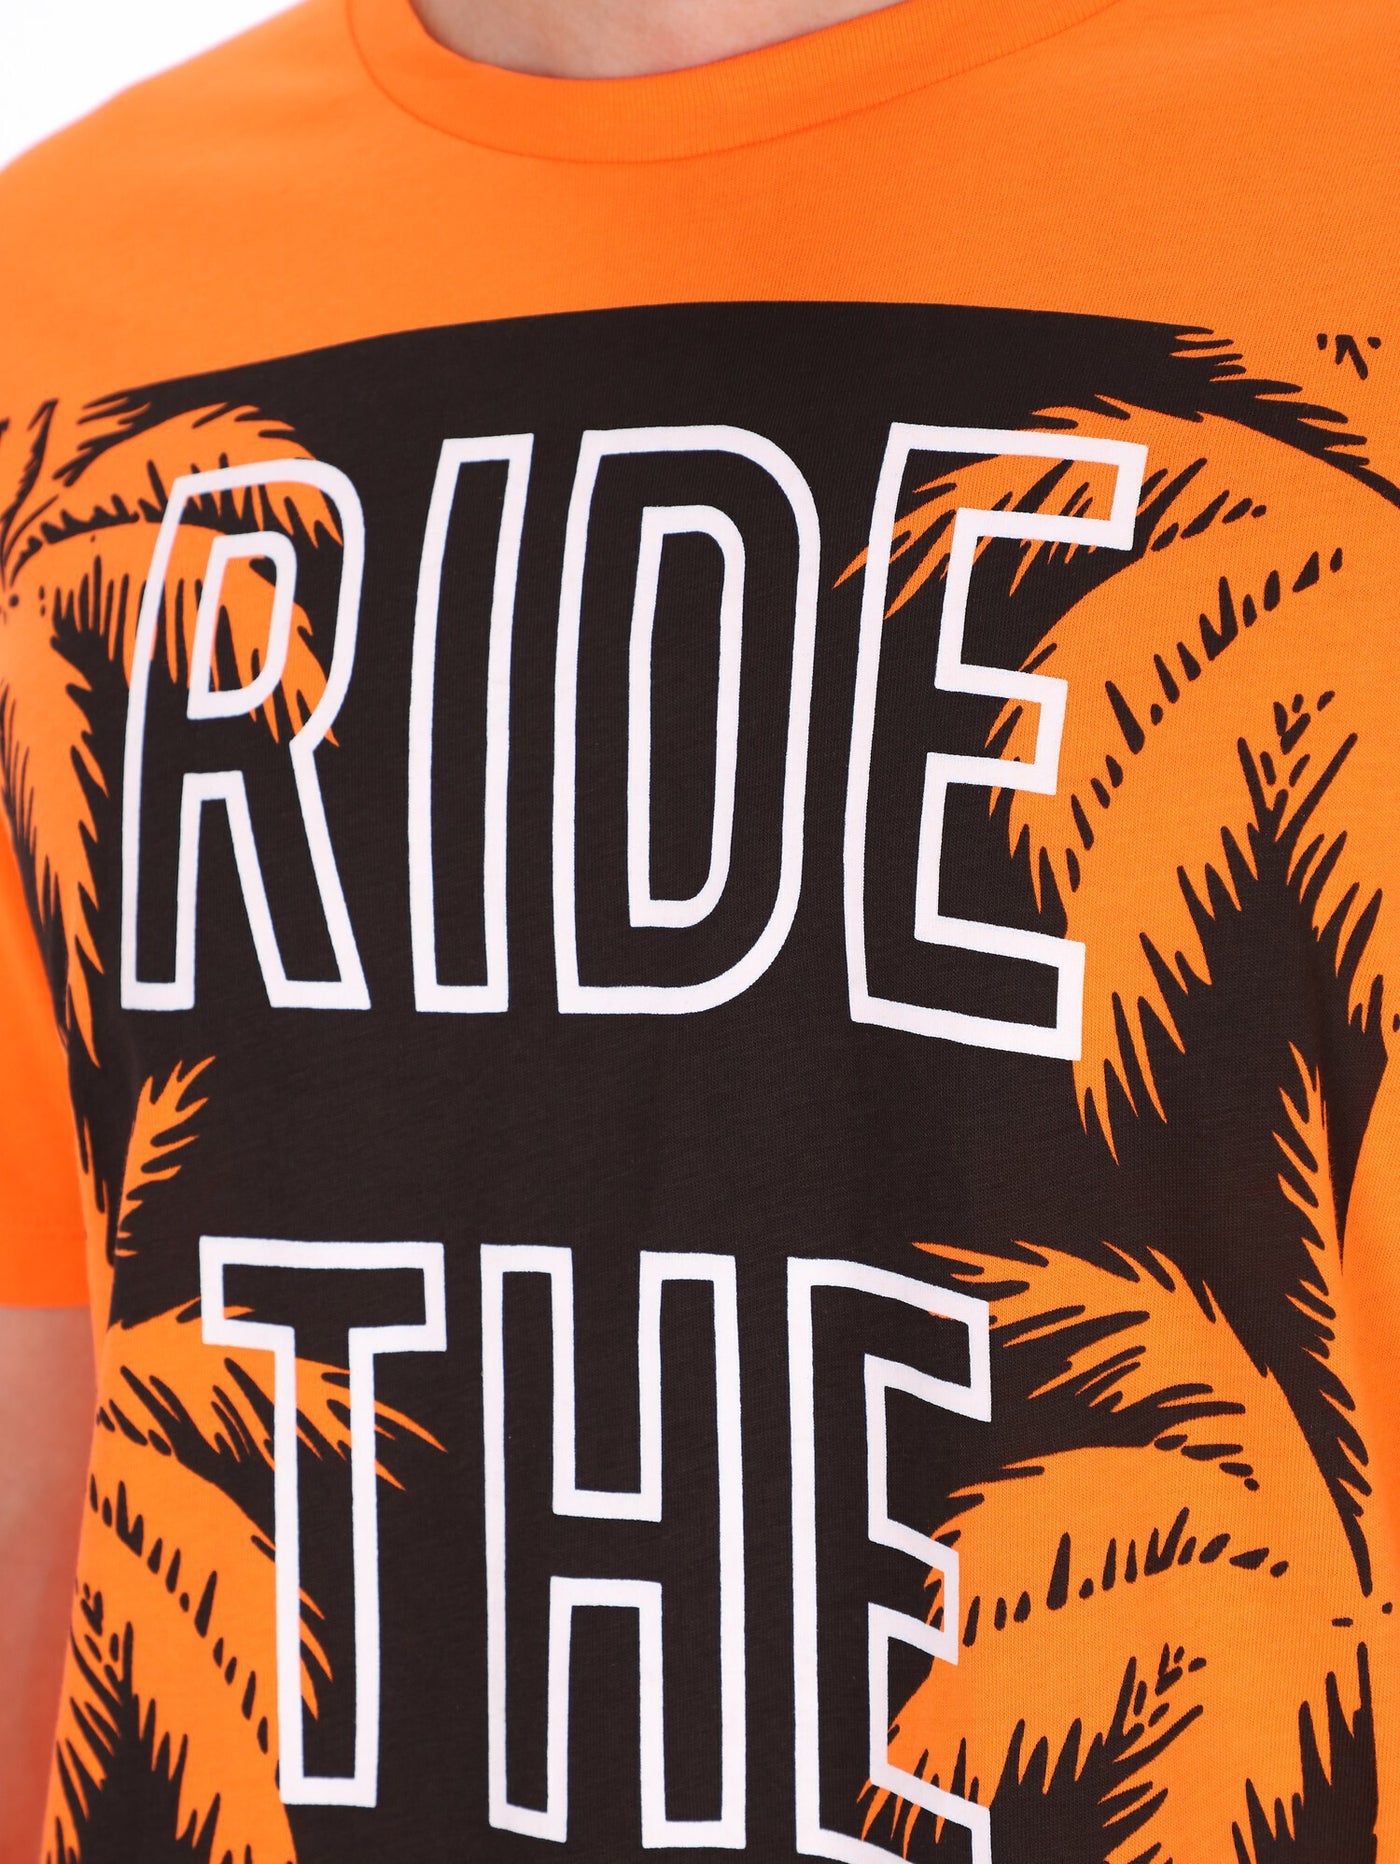 OR Men's Ride The Waves Print T-Shirt